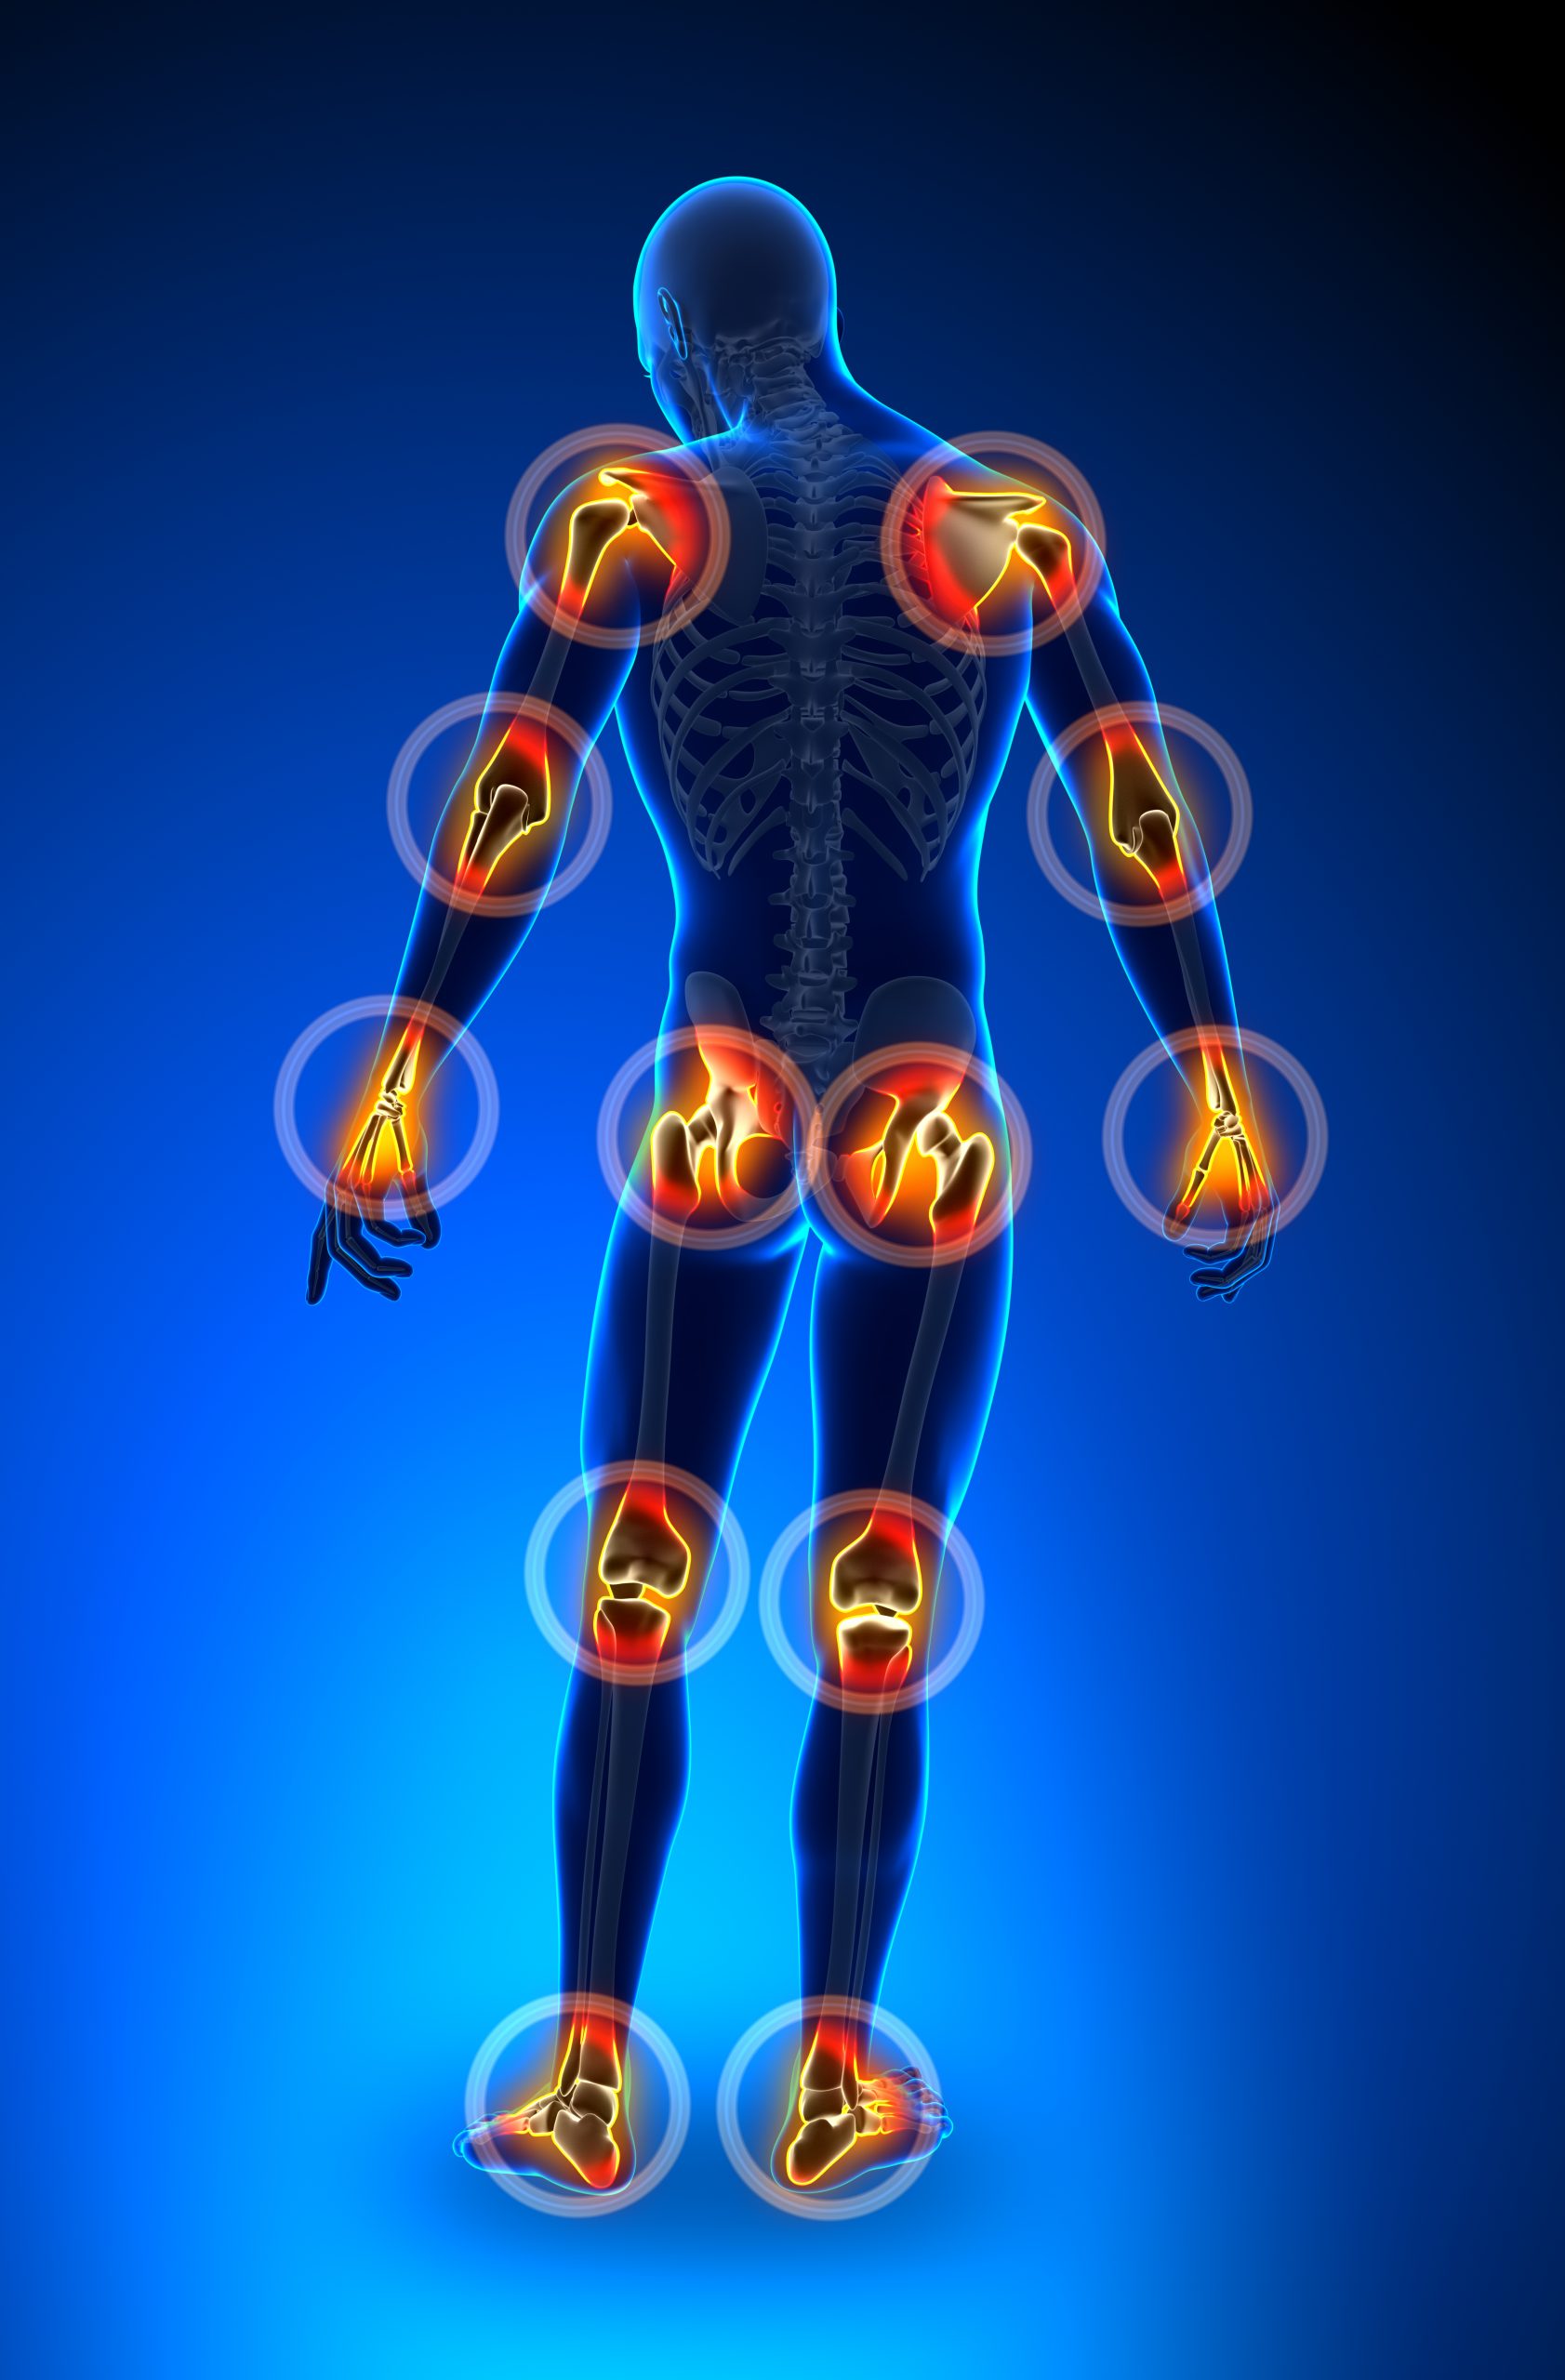 inflammation, foods that cause inflammation, bladder inflammation, heart inflammation, what is inflammation, how to reduce inflammation in the body fast, inflammation diet